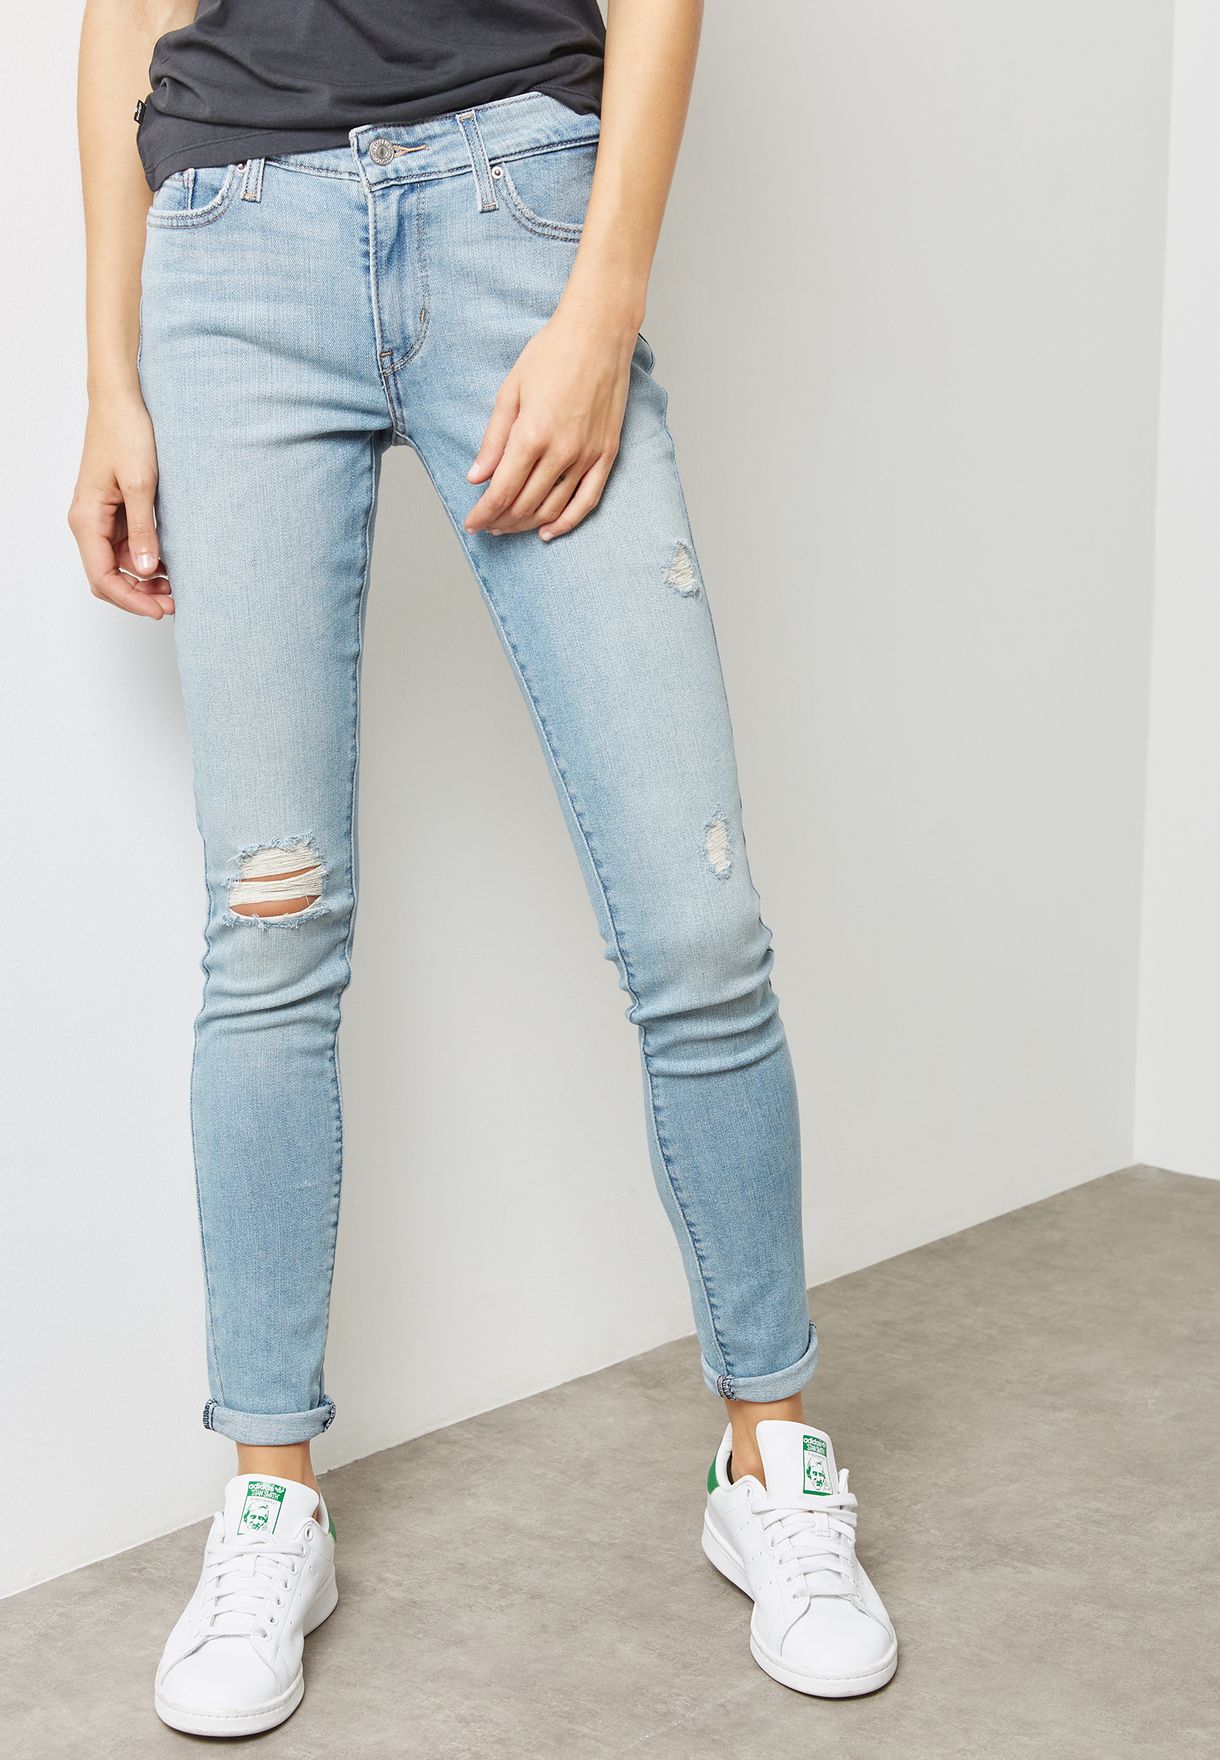 levi's 711 ripped skinny jeans